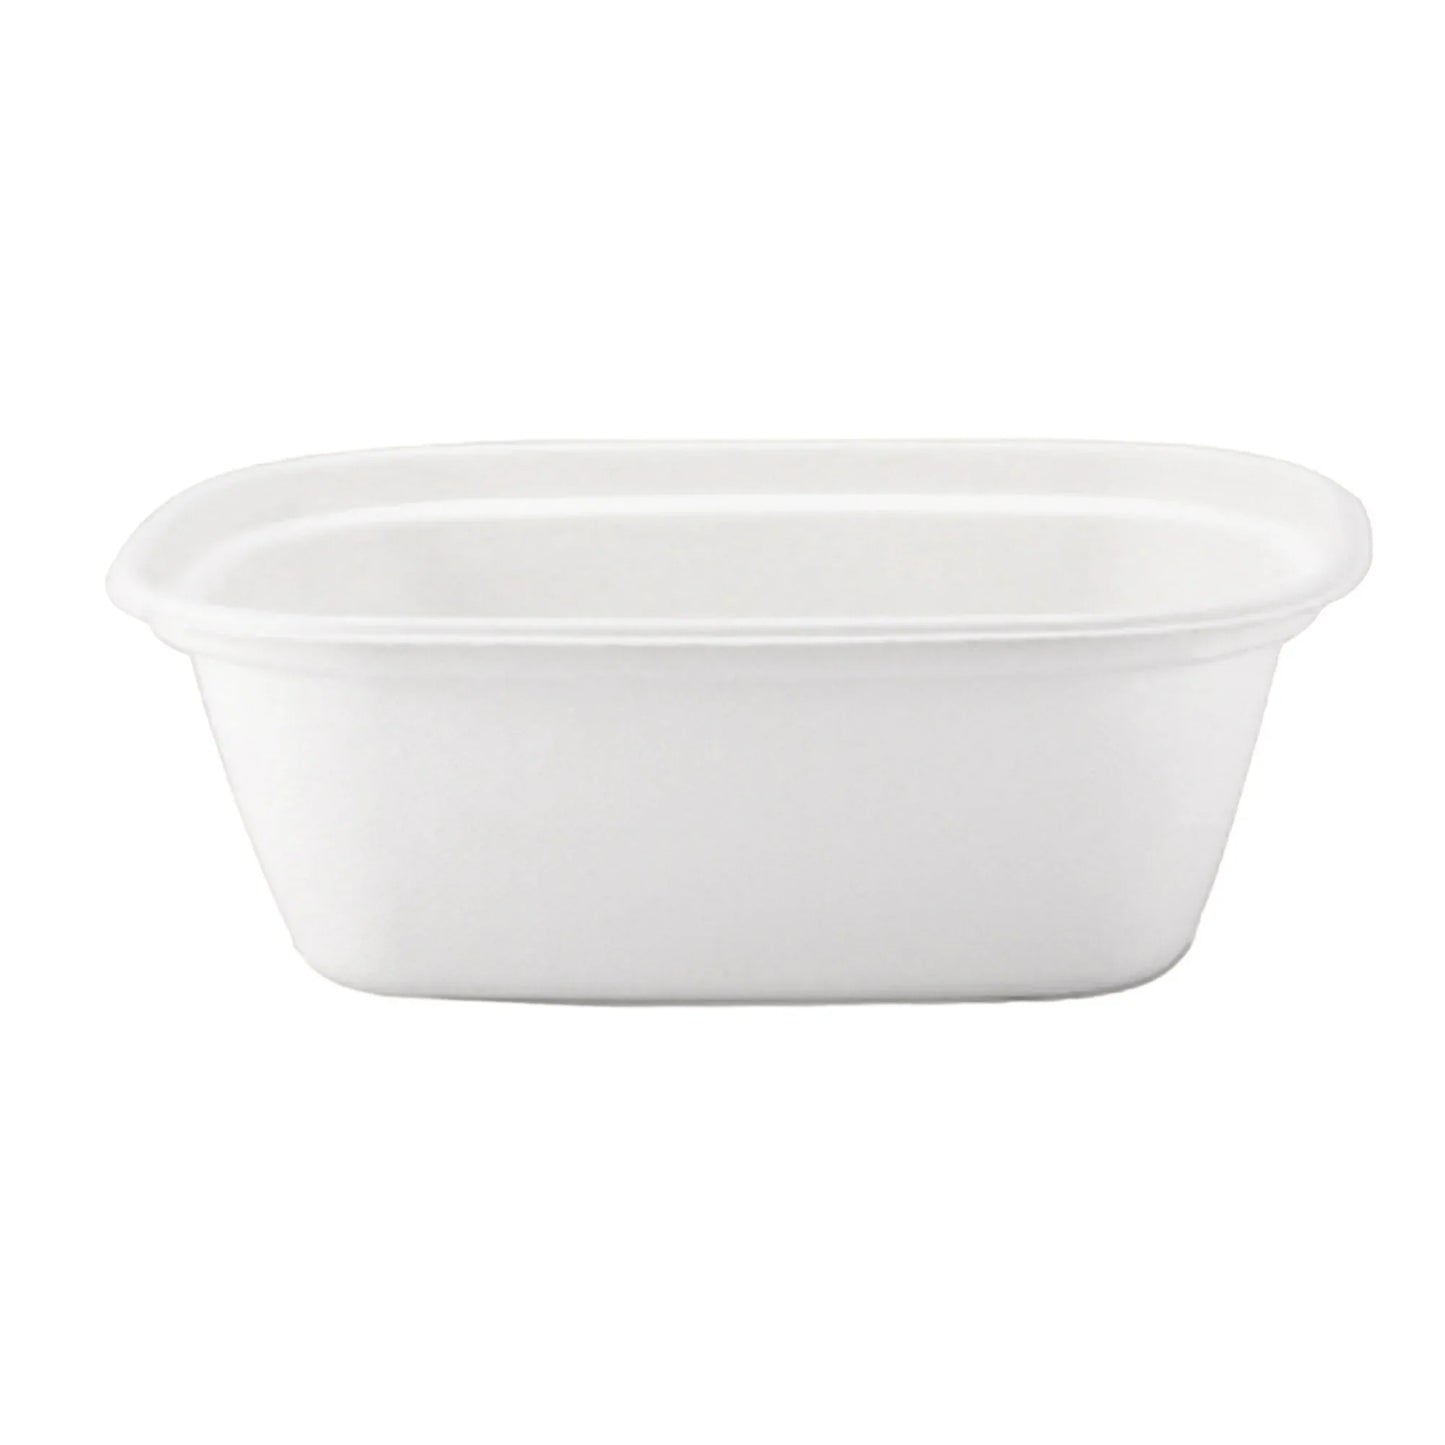 48 oz Takeout Box | Rectangular | Compostable (Pack of 50)